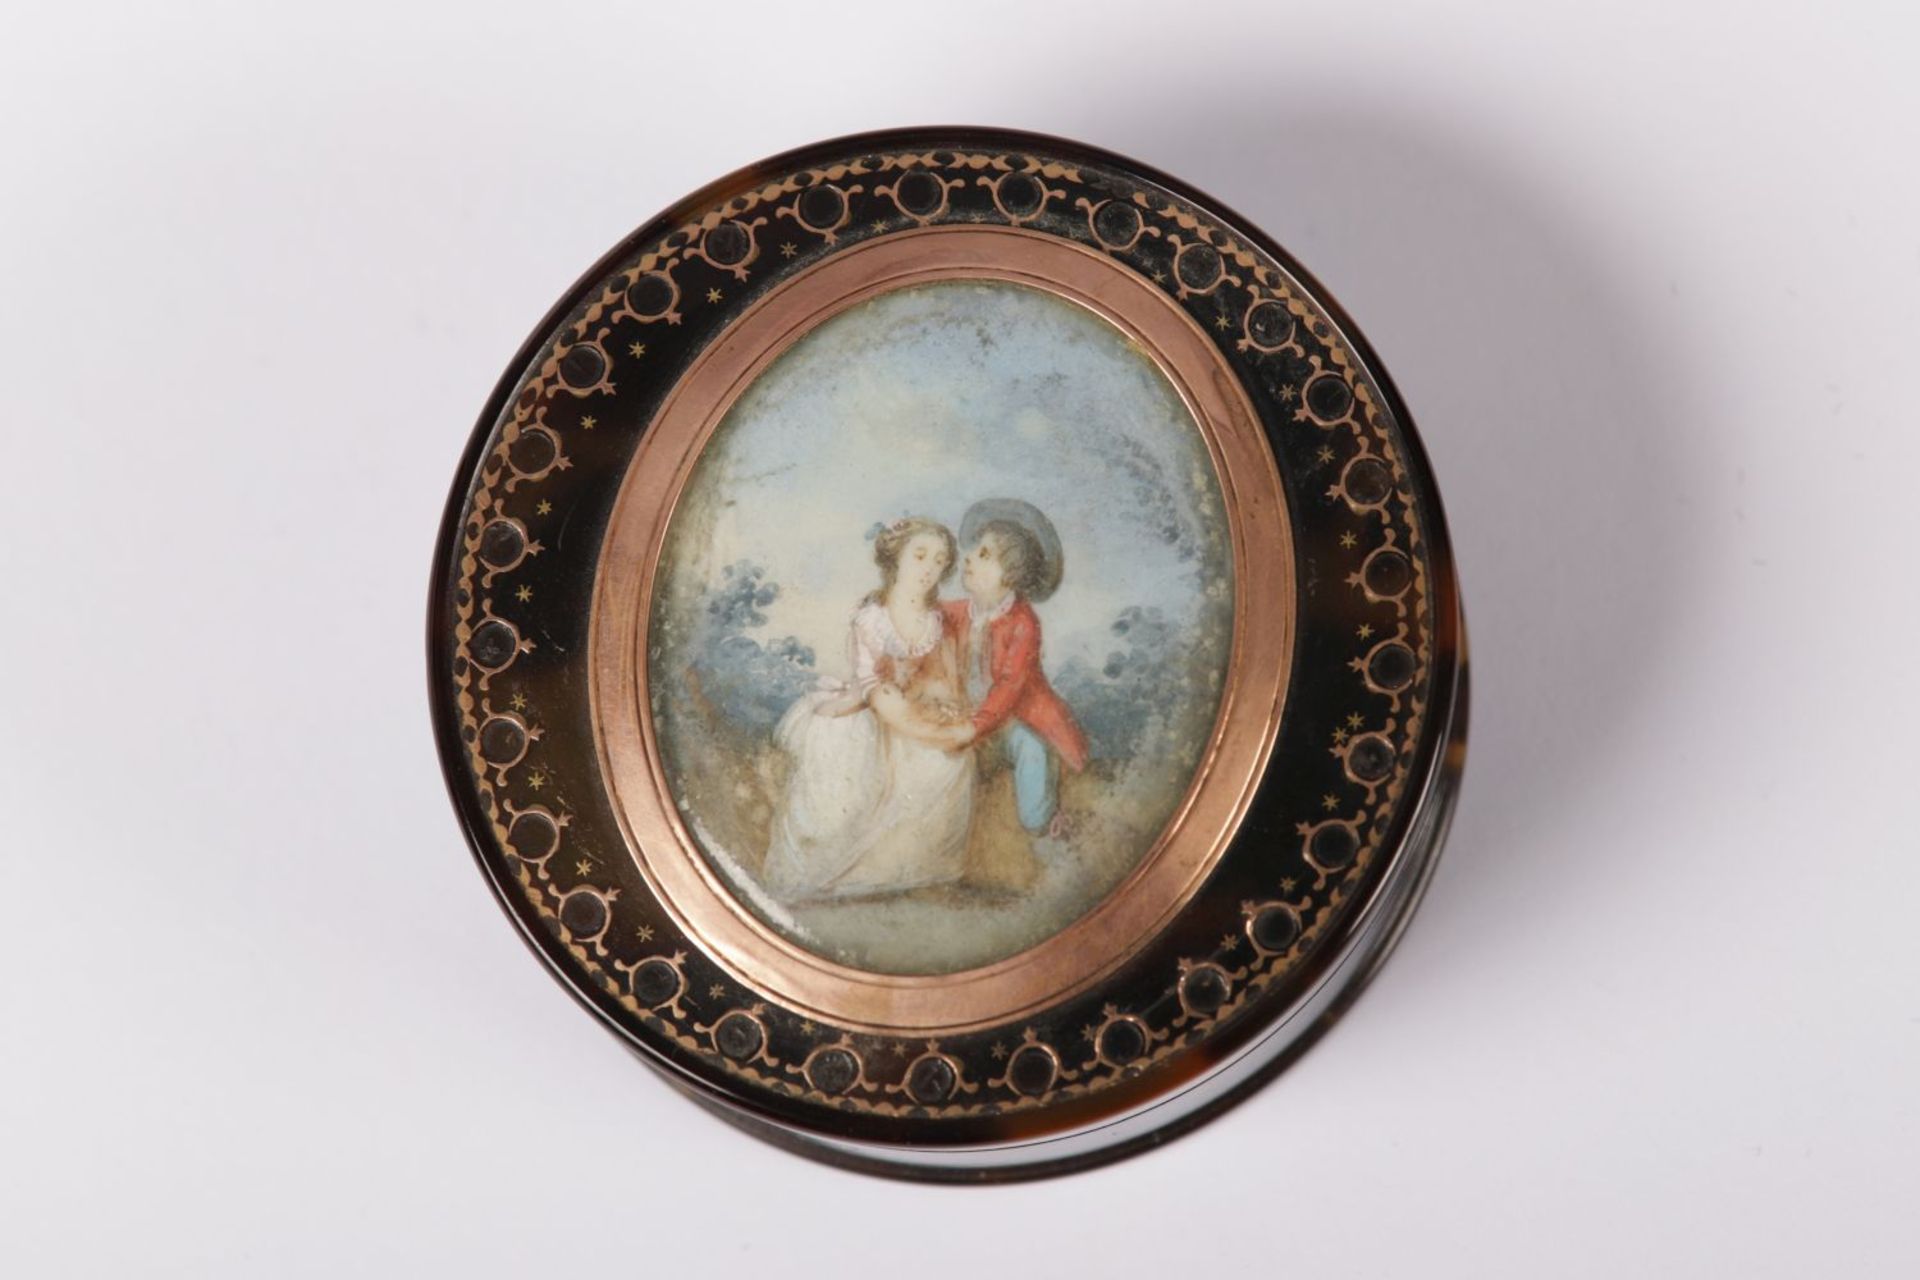 EARLY 19TH-CENTURY HAND-PAINTED BOX